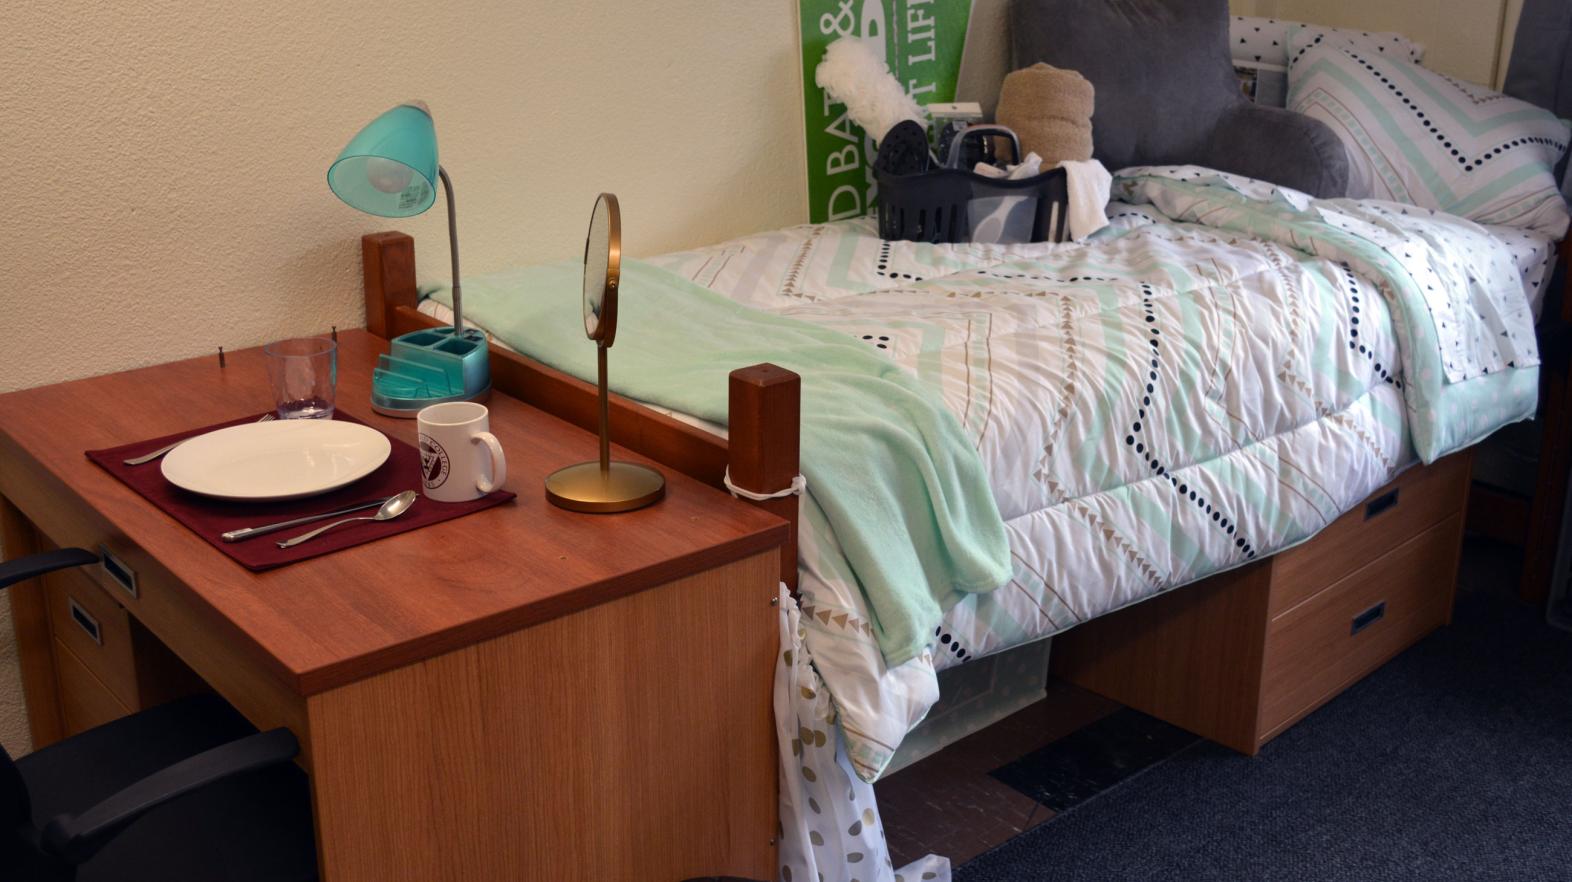 A desk with a plate on it and a bed in Massasoit Hall.